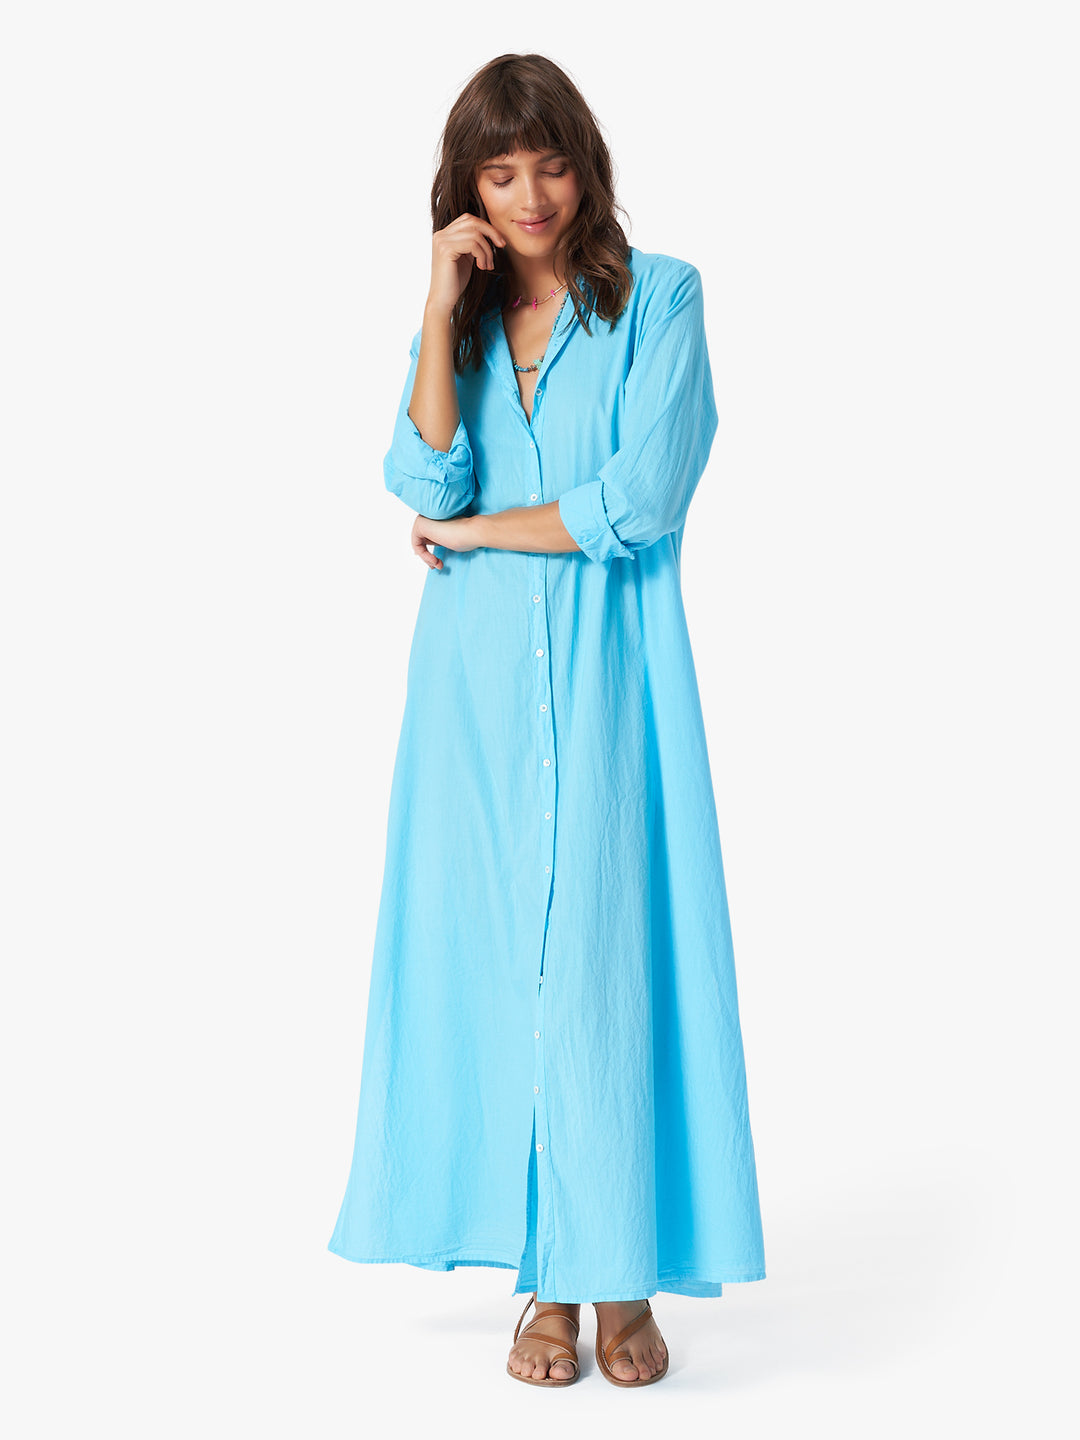 Xirena - Boden Dress in Turquoise